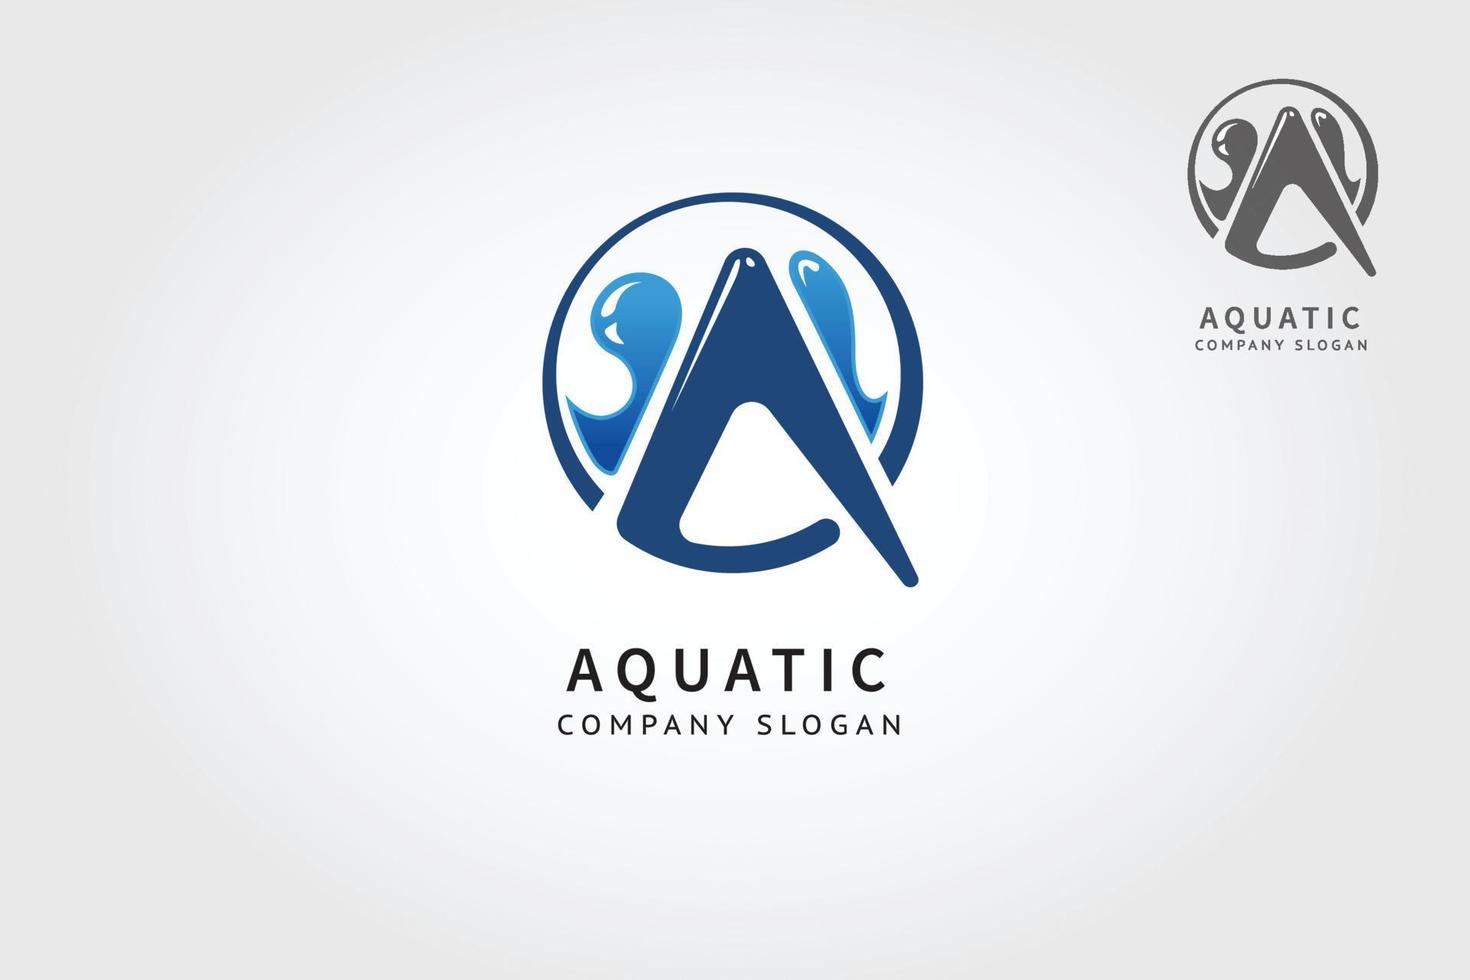 Aquatics Vector Logo Template is a designed for any types of companies. It is made by simple shapes although looks very professional. Basic of this is logo is letter of A or it's an initial.